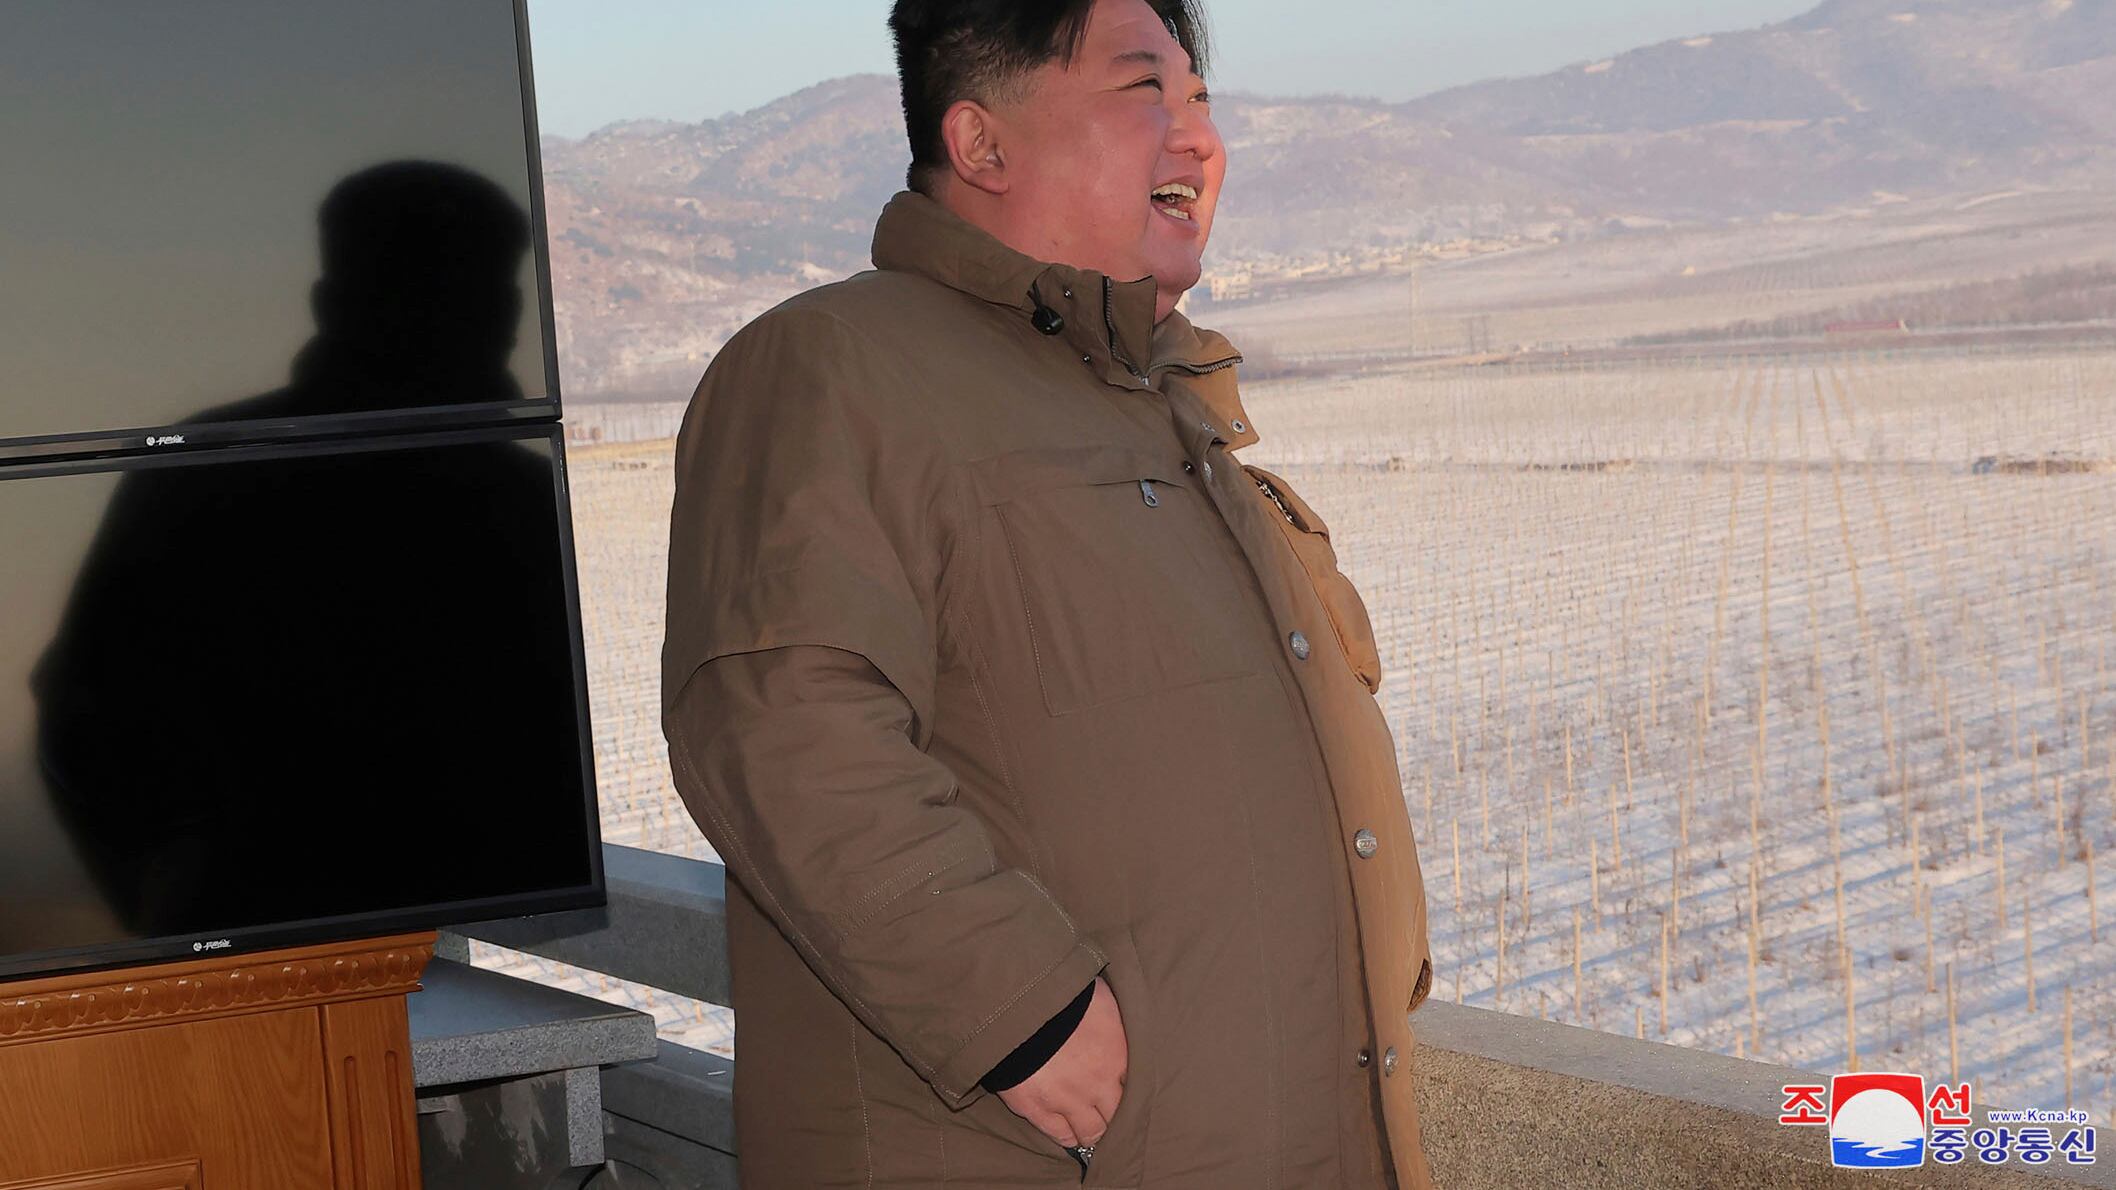 North Korean leader Kim Jong Un watches a test launch of what it says is an intercontinental ballistic missile from an undisclosed location in North Korea (Korean Central News Agency/Korea News Service via AP)